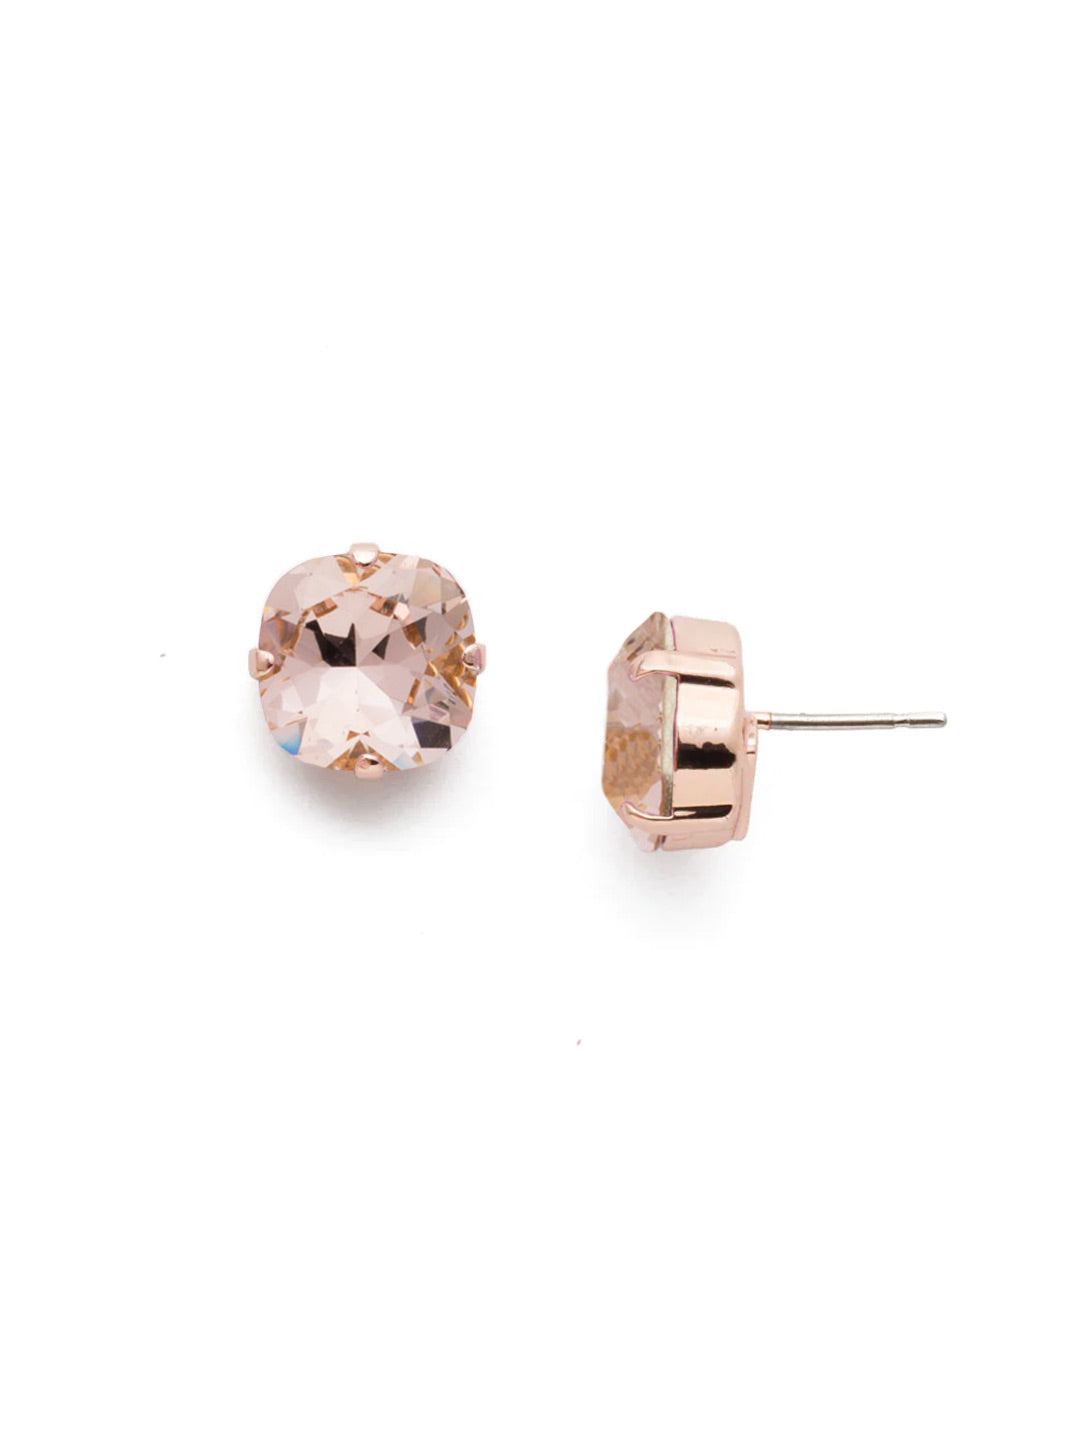 Halcyon Stud Earrings - EDH25RGVIN - <p>A beautiful, luminous cushion-cut crystal in a classic four-pronged setting that's ideal for everyday wear. From Sorrelli's Vintage Rose collection in our Rose Gold-tone finish.</p>